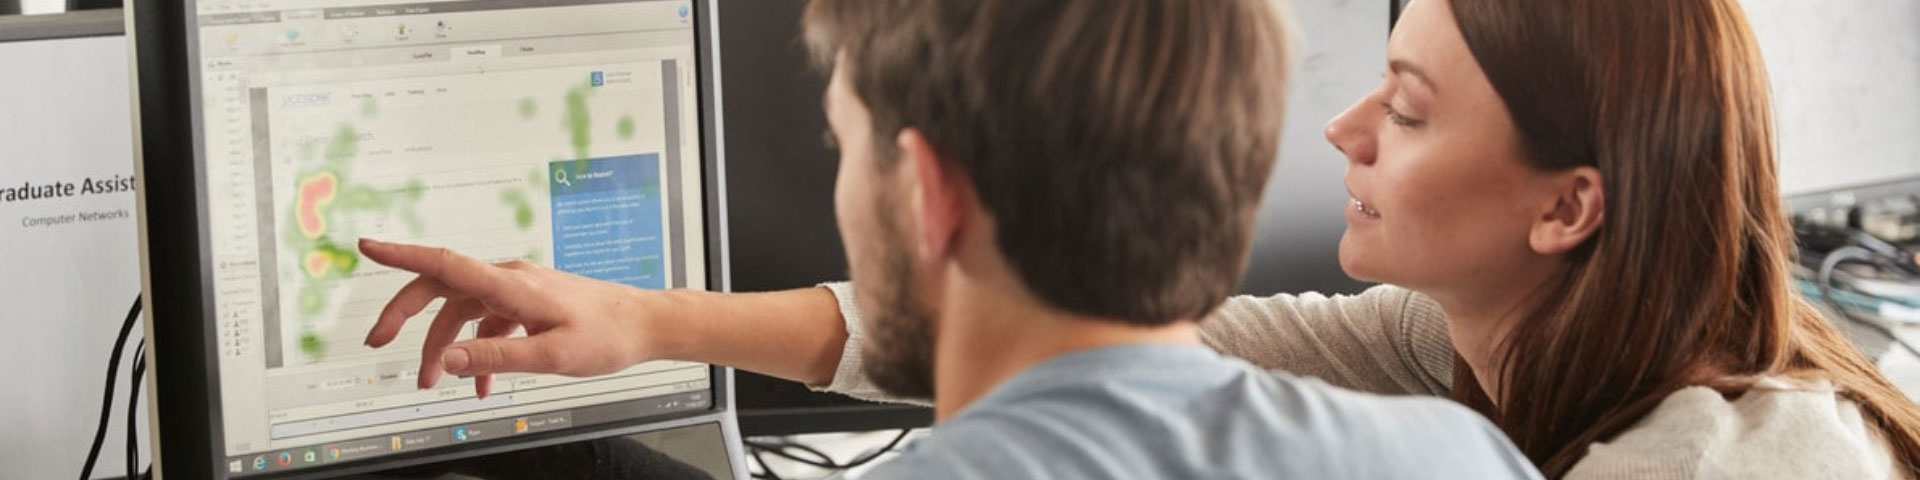 A female teacher points at a computer screen while sat next to a male student.